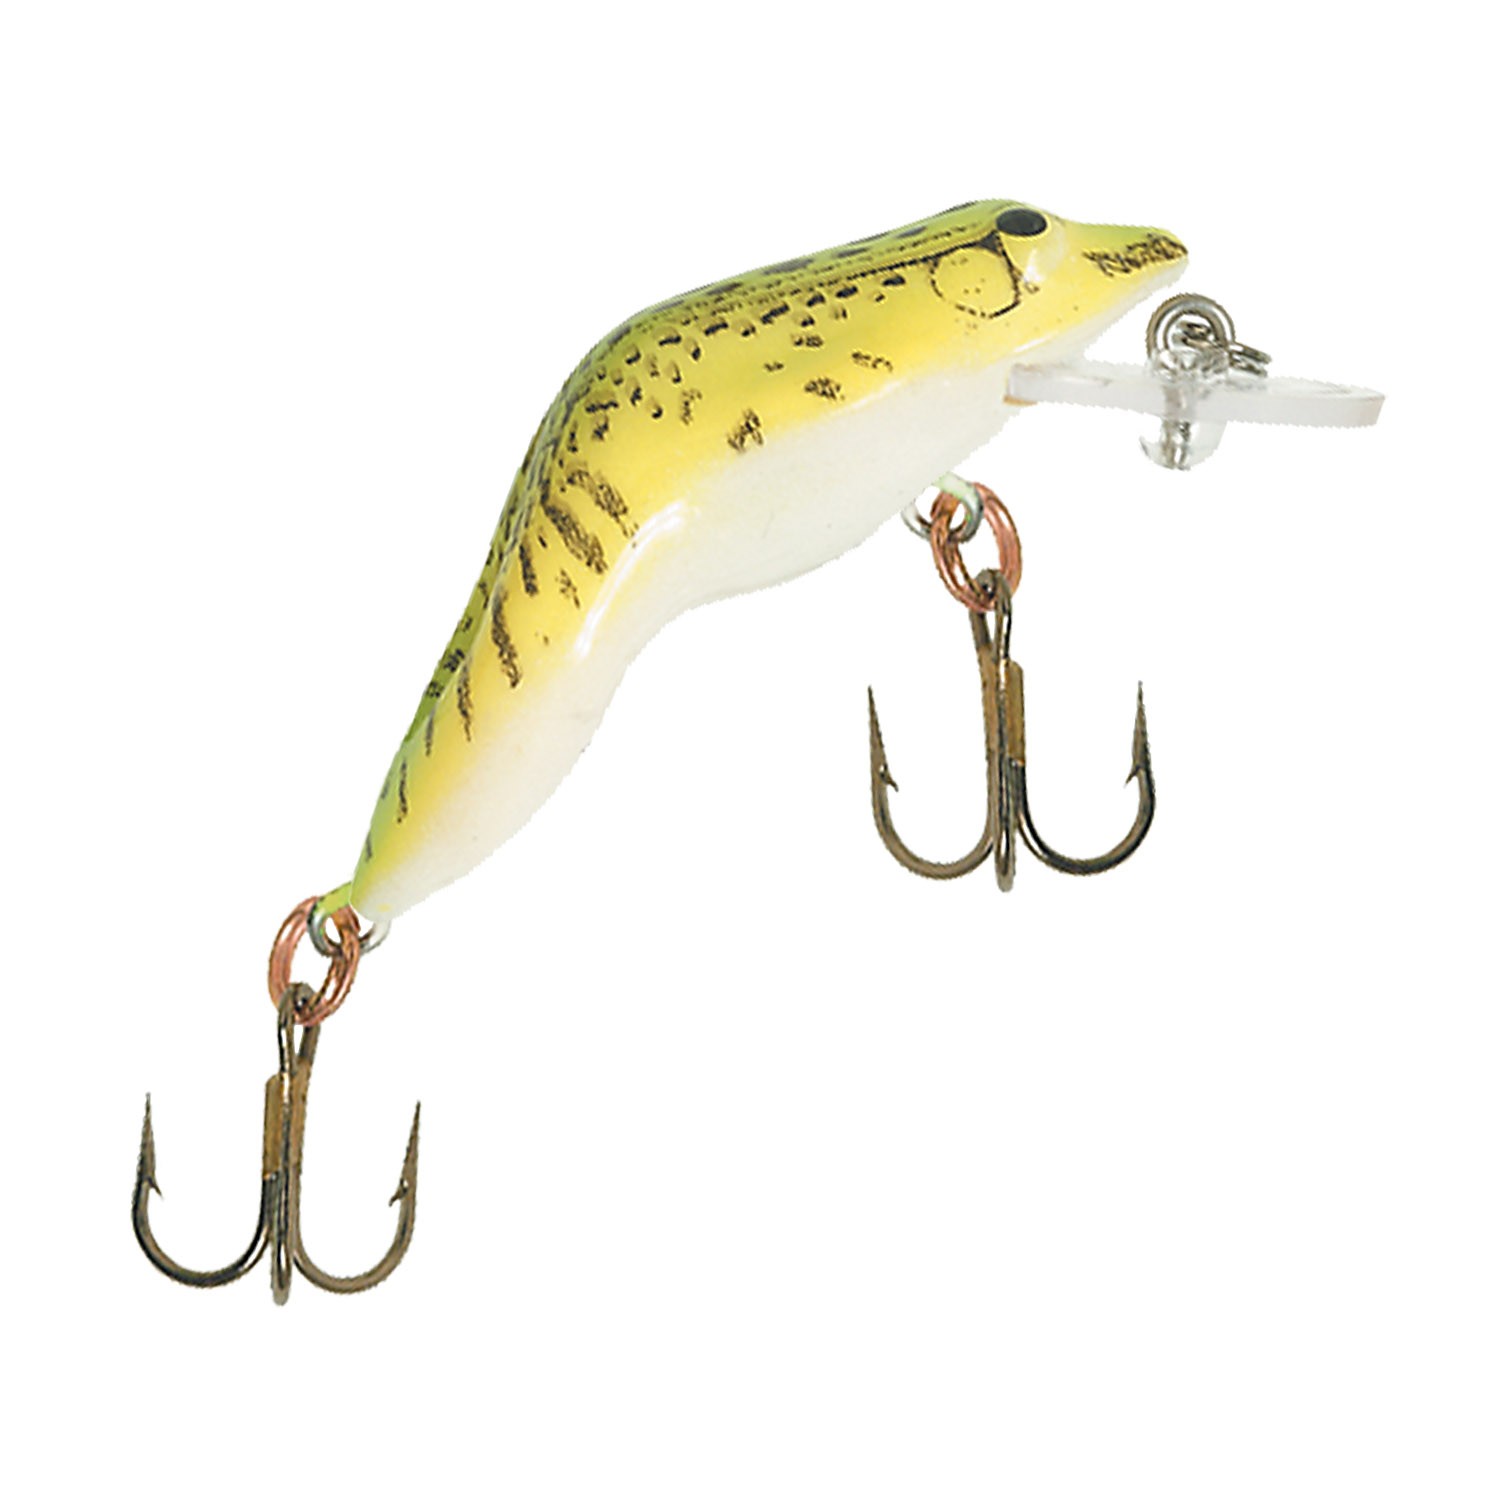 Isca Articificial Rebel Wee Frog F71 Floating